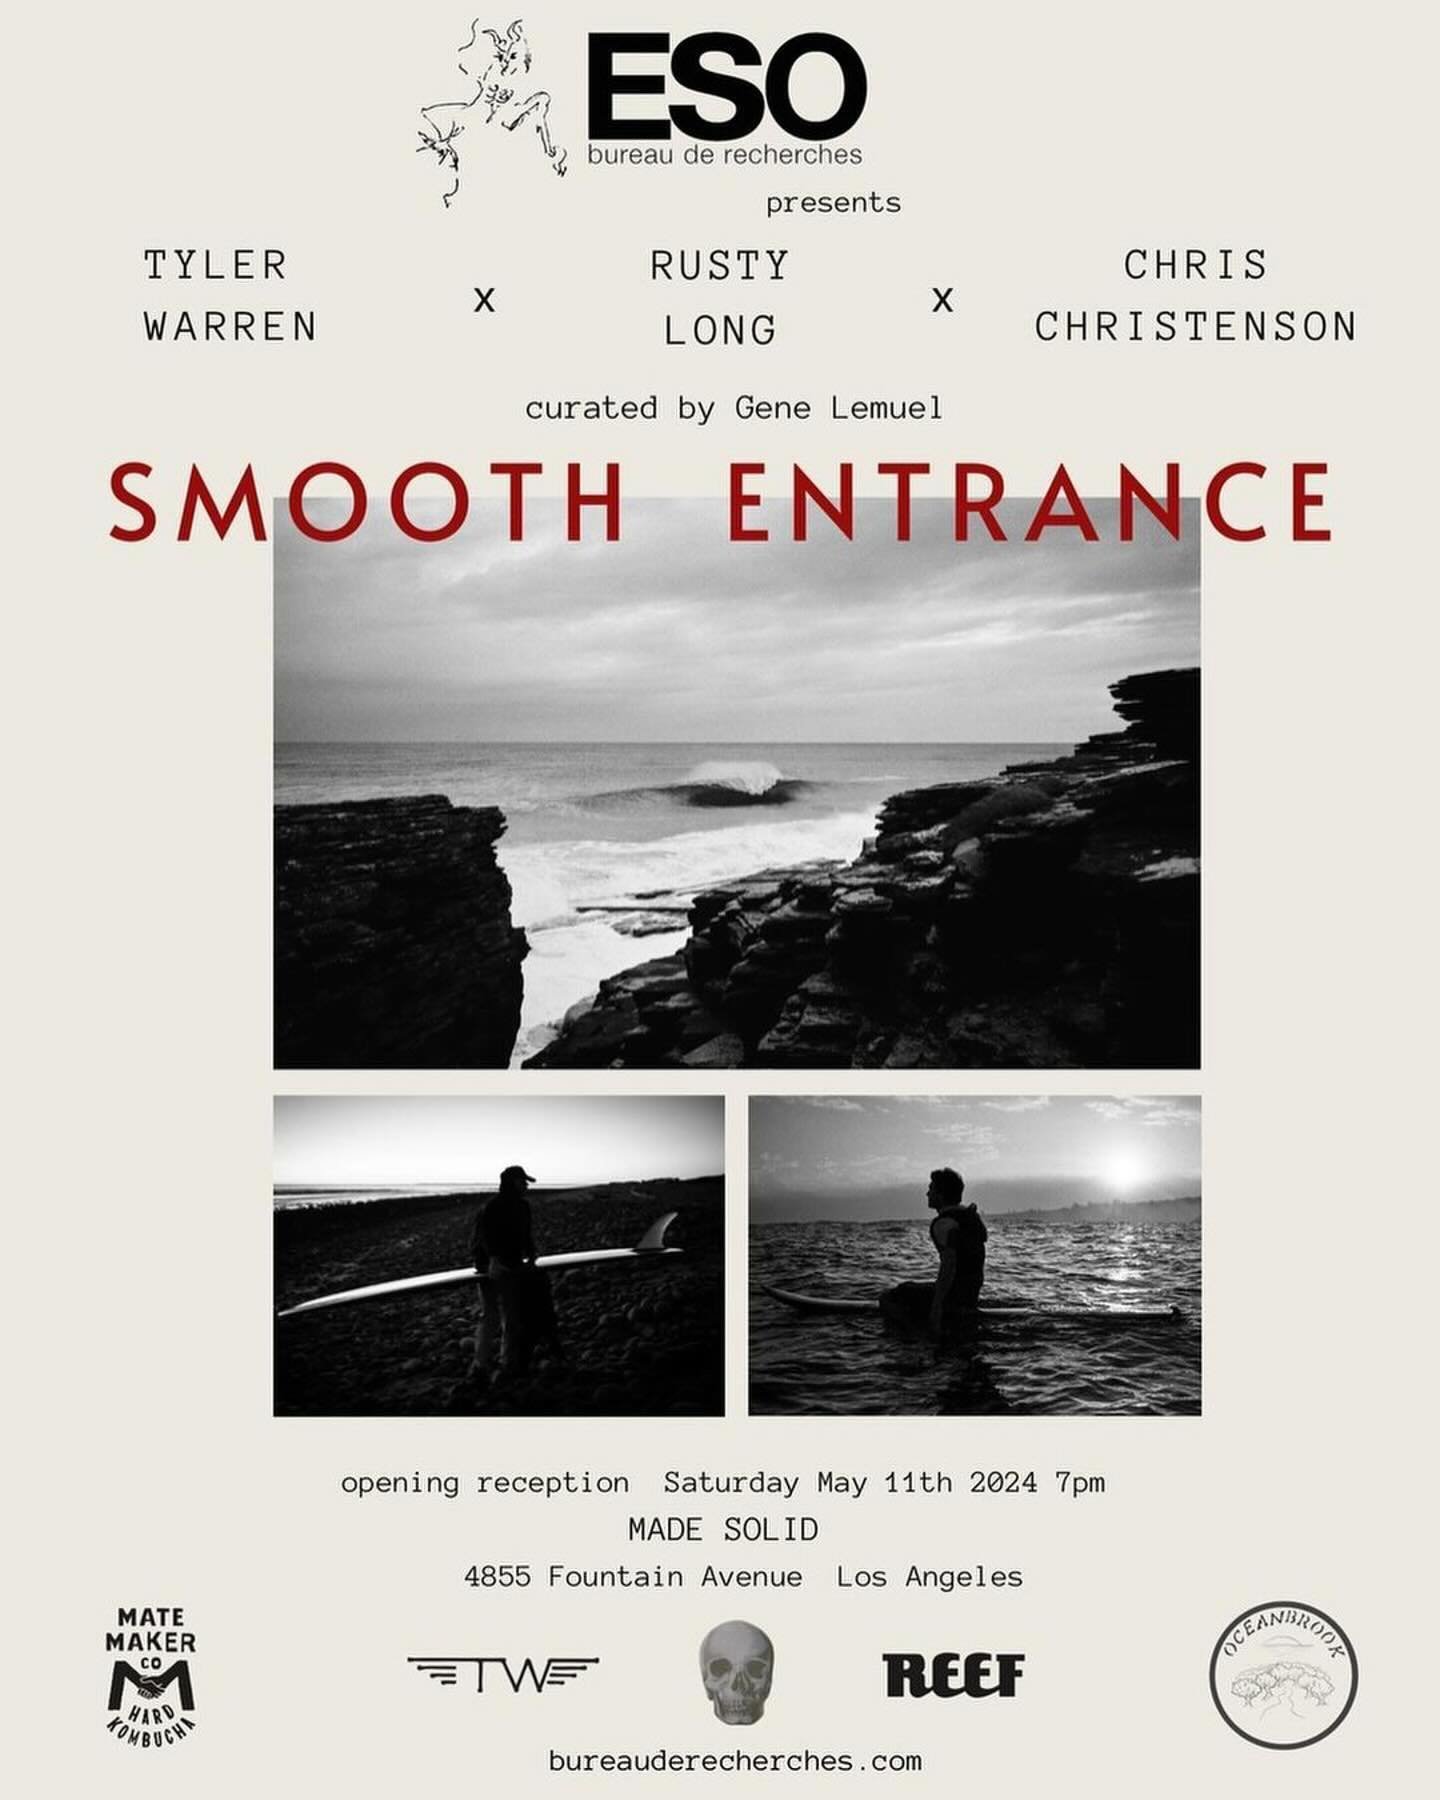 Made Solid is proud to welcome Tyler Warren, Rusty Long and Chris Christenson to our 4855 Fountain location in Los Angeles for Smooth Entrance. Details below. 

Please join us on Saturday May 11th 7-10p to celebrate the opening of this monumental exh